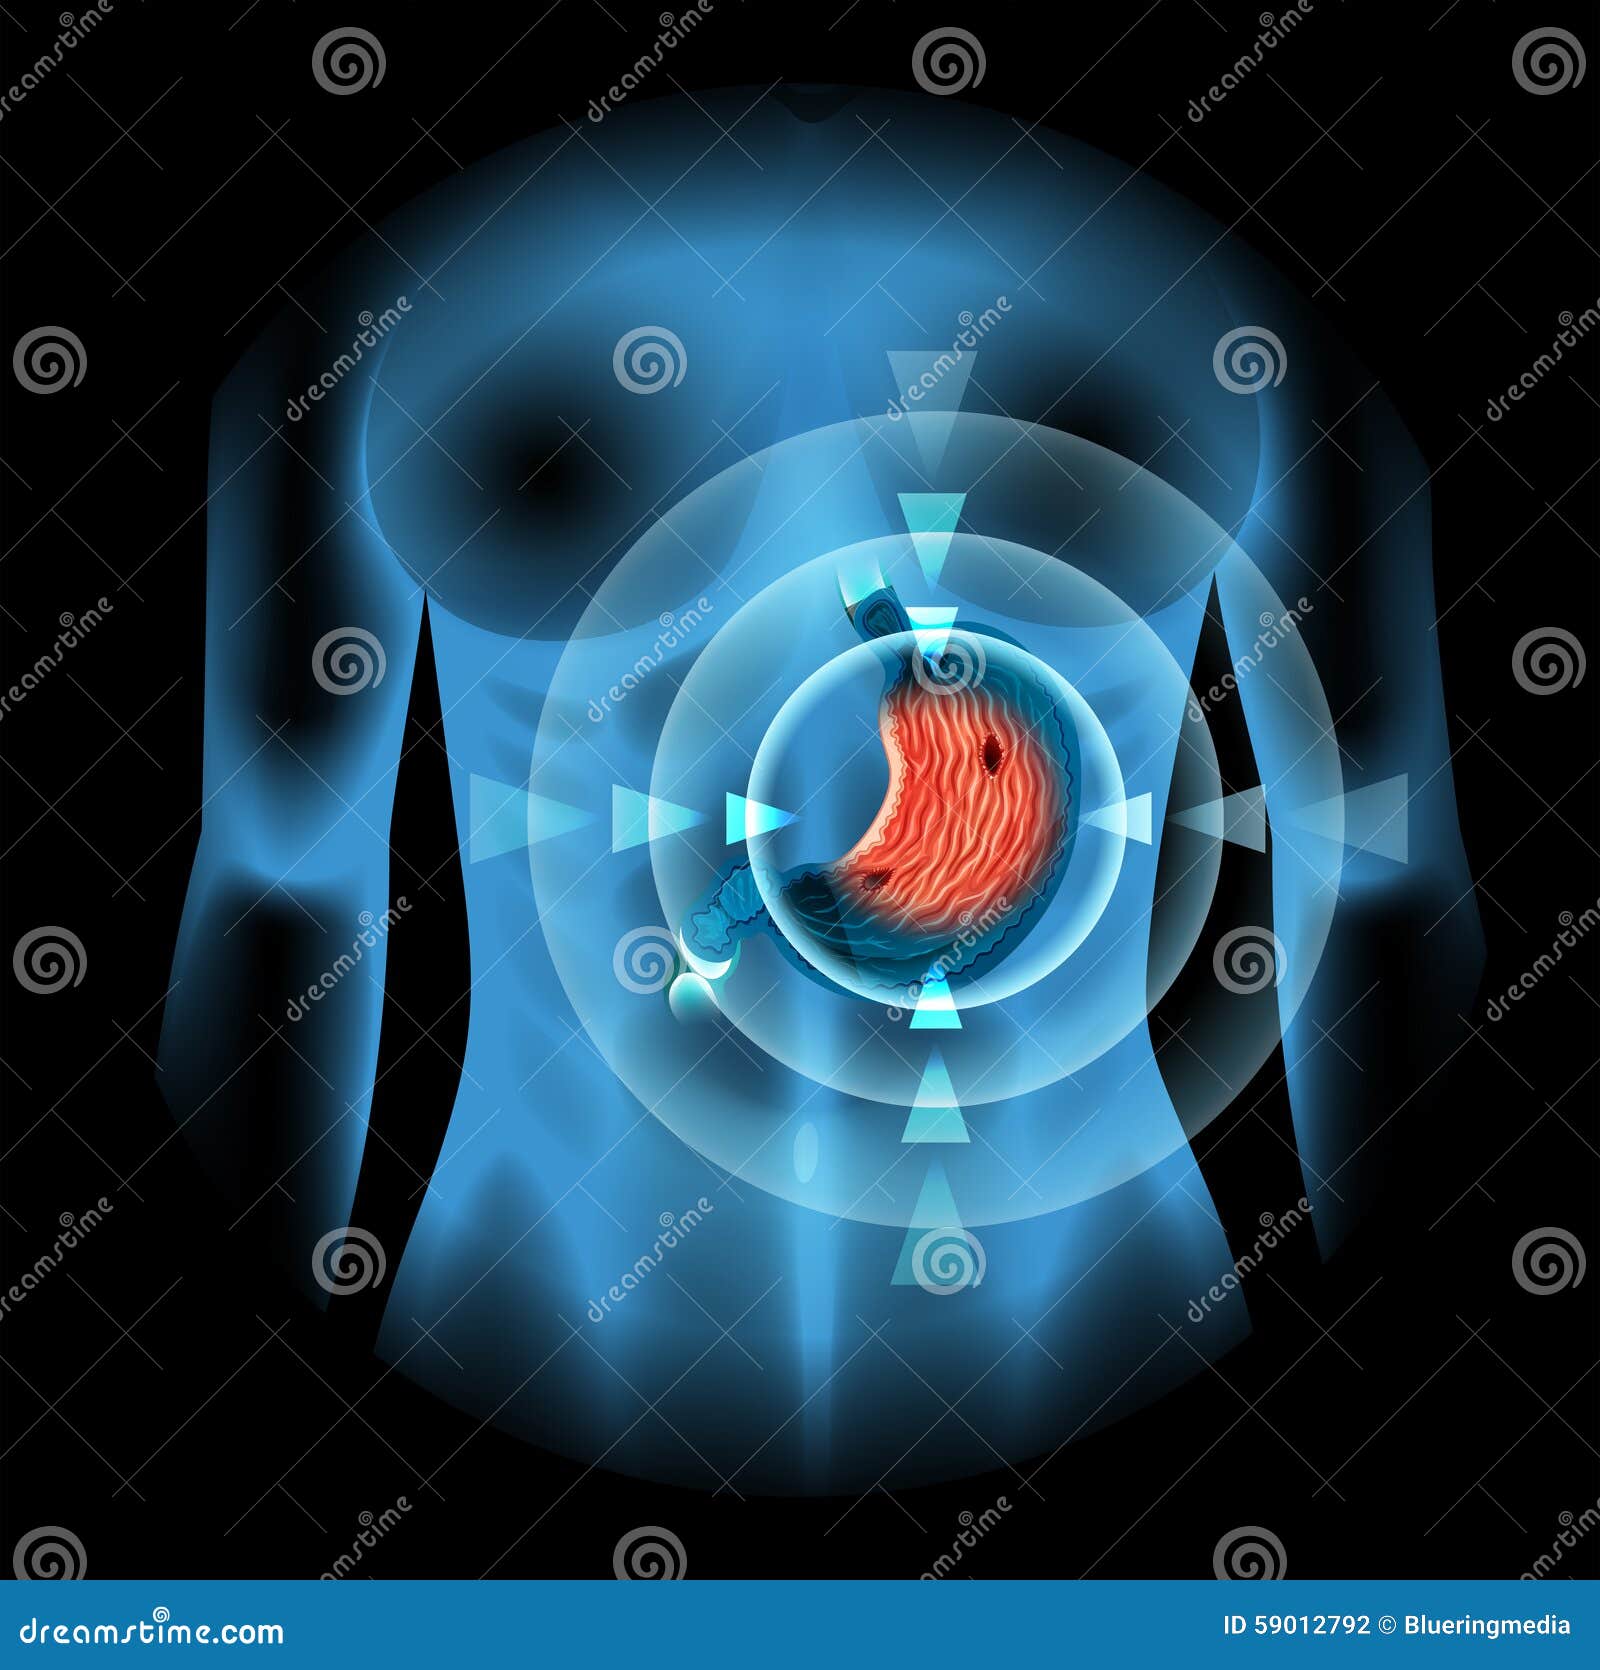 Stomach Ulcer Diagram In Woman Stock Vector